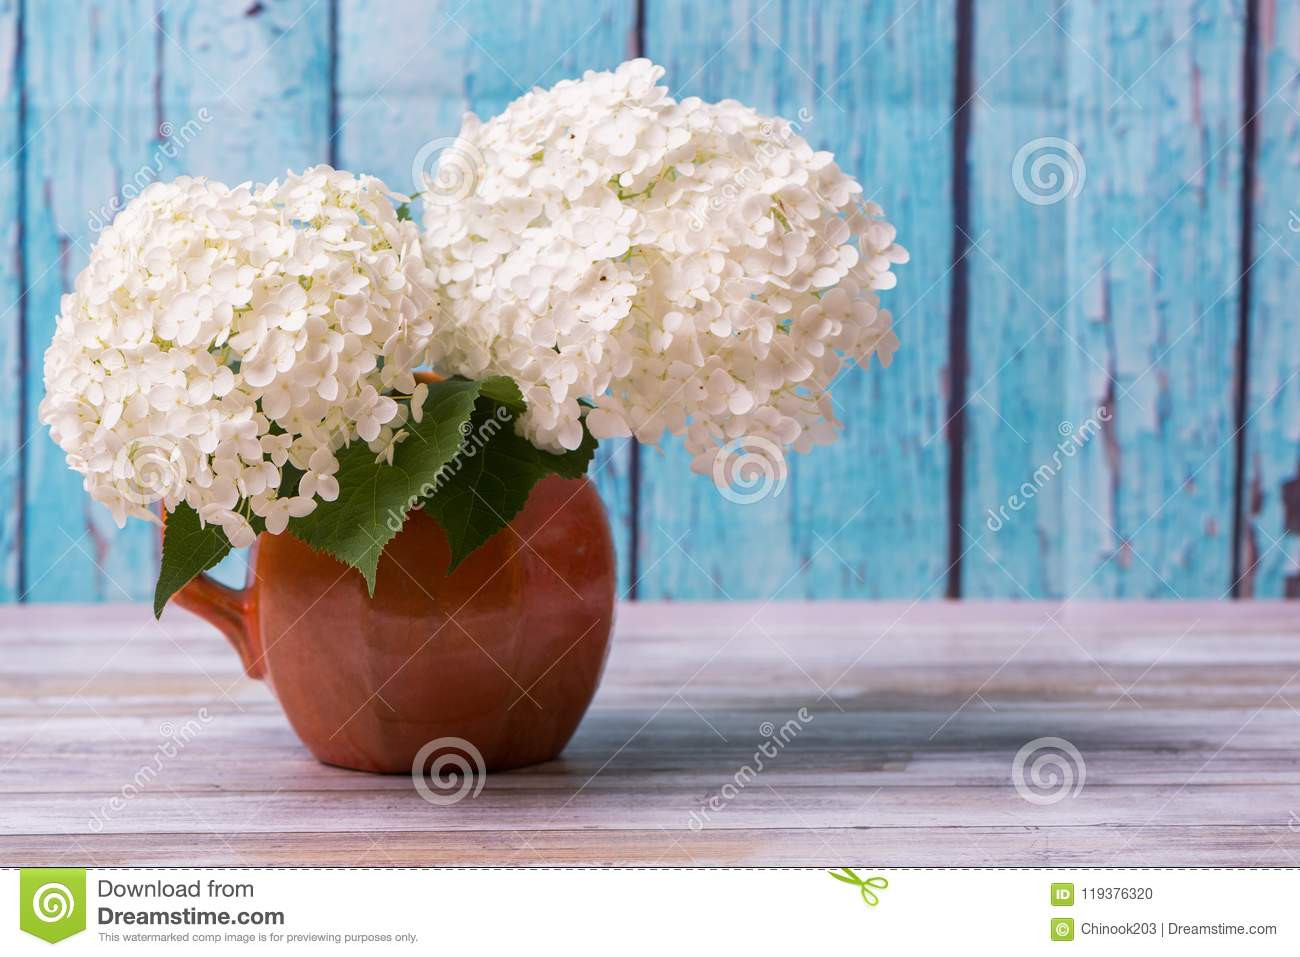 30 Wonderful Hydrangea and Rose Arrangement In Glass Vase 2024 free download hydrangea and rose arrangement in glass vase of white hydrangea flowers in a rustic vase with blue background stock with regard to white hydrangea flowers in a rustic vase with blue backgrou